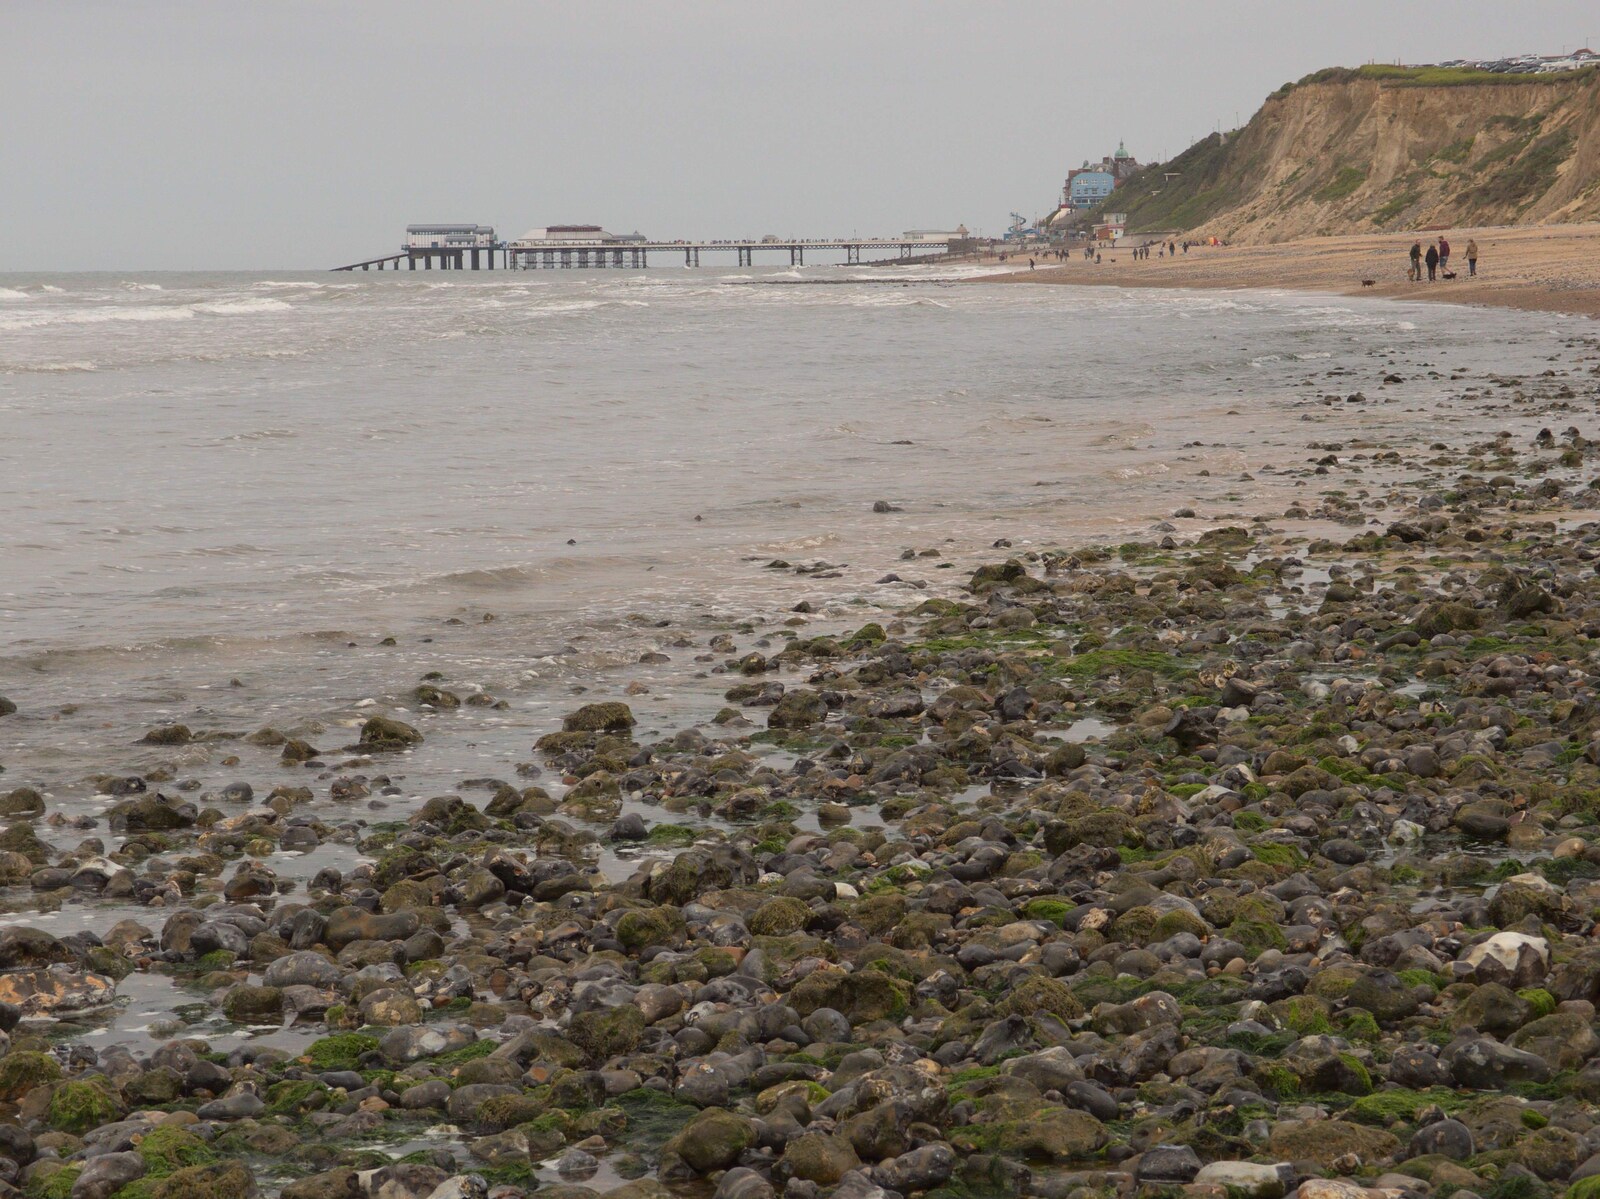 The view down to Cromer pier from A Birthday Camping Trip, East Runton, North Norfolk - 26th May 2015